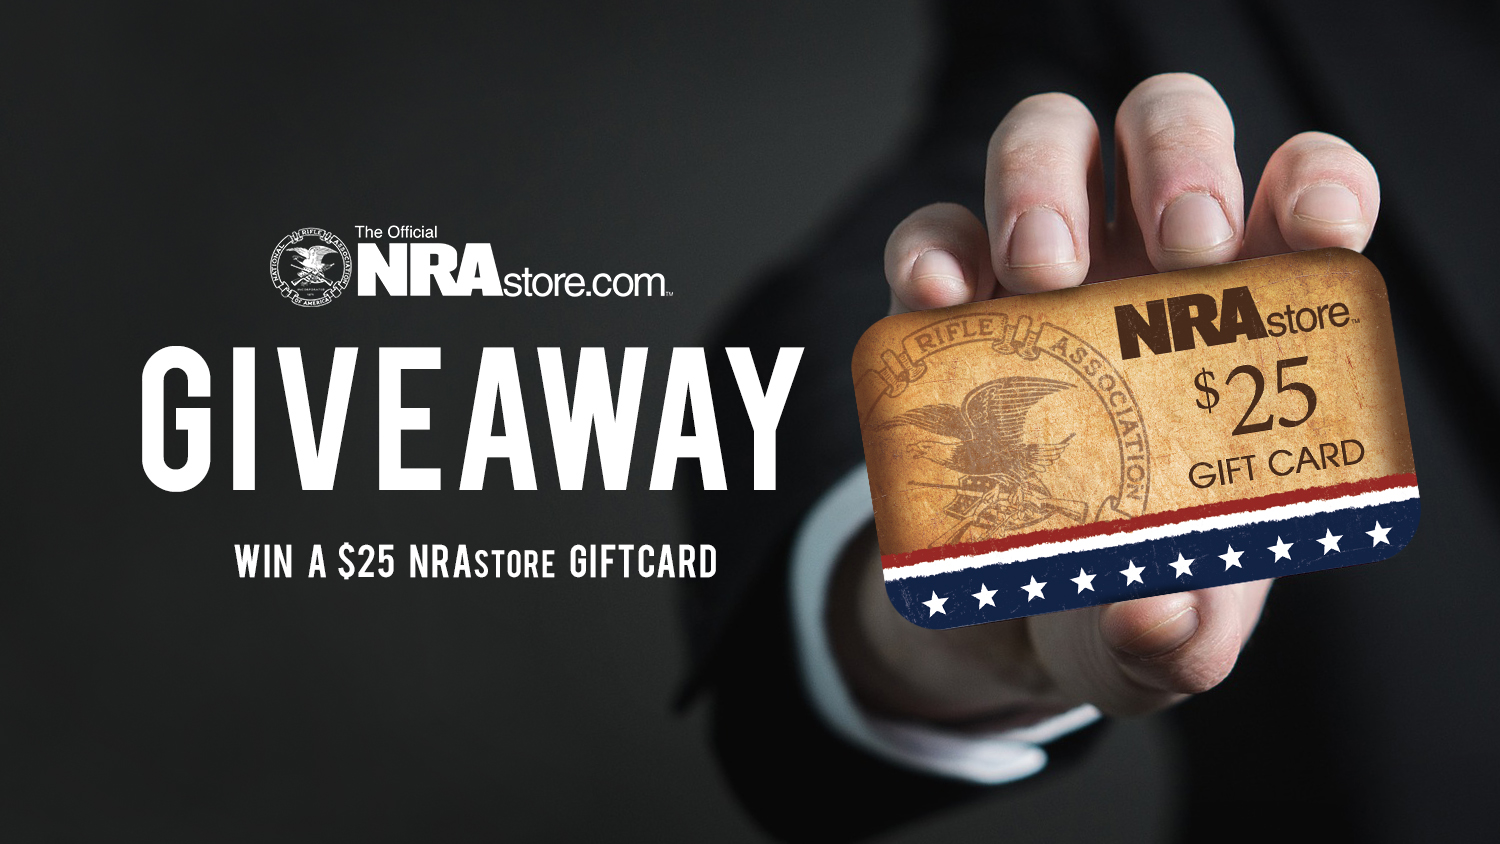 Enter To Win A FREE $25 Gift Card From The NRAstore